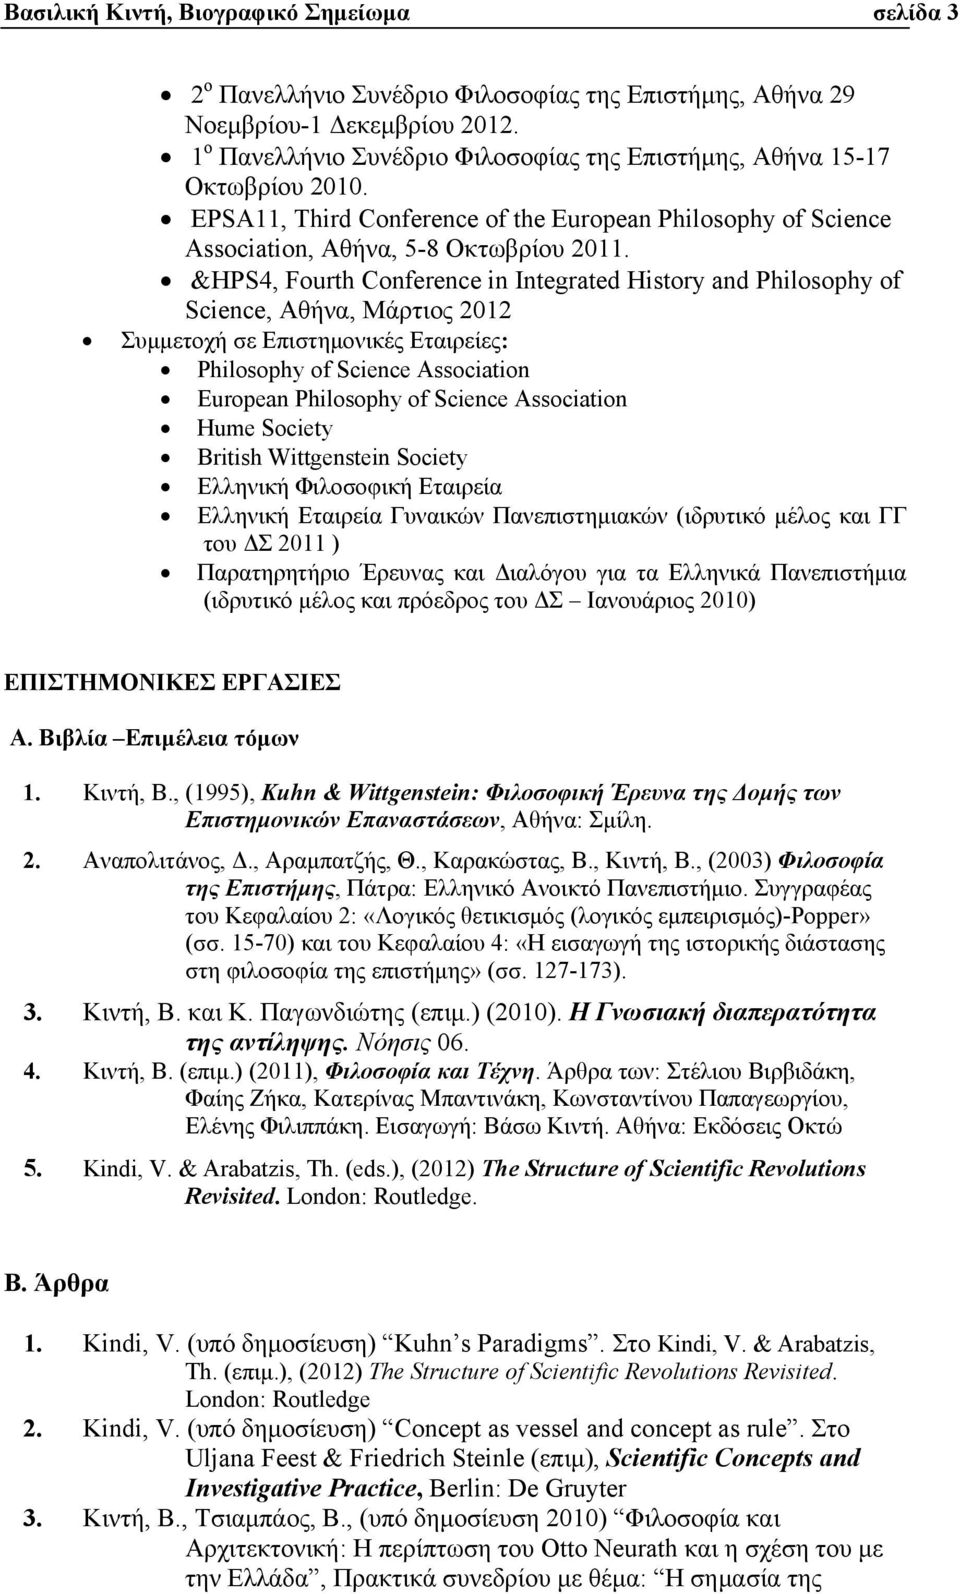 &HPS4, Fourth Conference in Integrated History and Philosophy of Science, Αθήνα, Μάρτιος 2012 Συµµετοχή σε Επιστηµονικές Εταιρείες: Philosophy of Science Association European Philosophy of Science